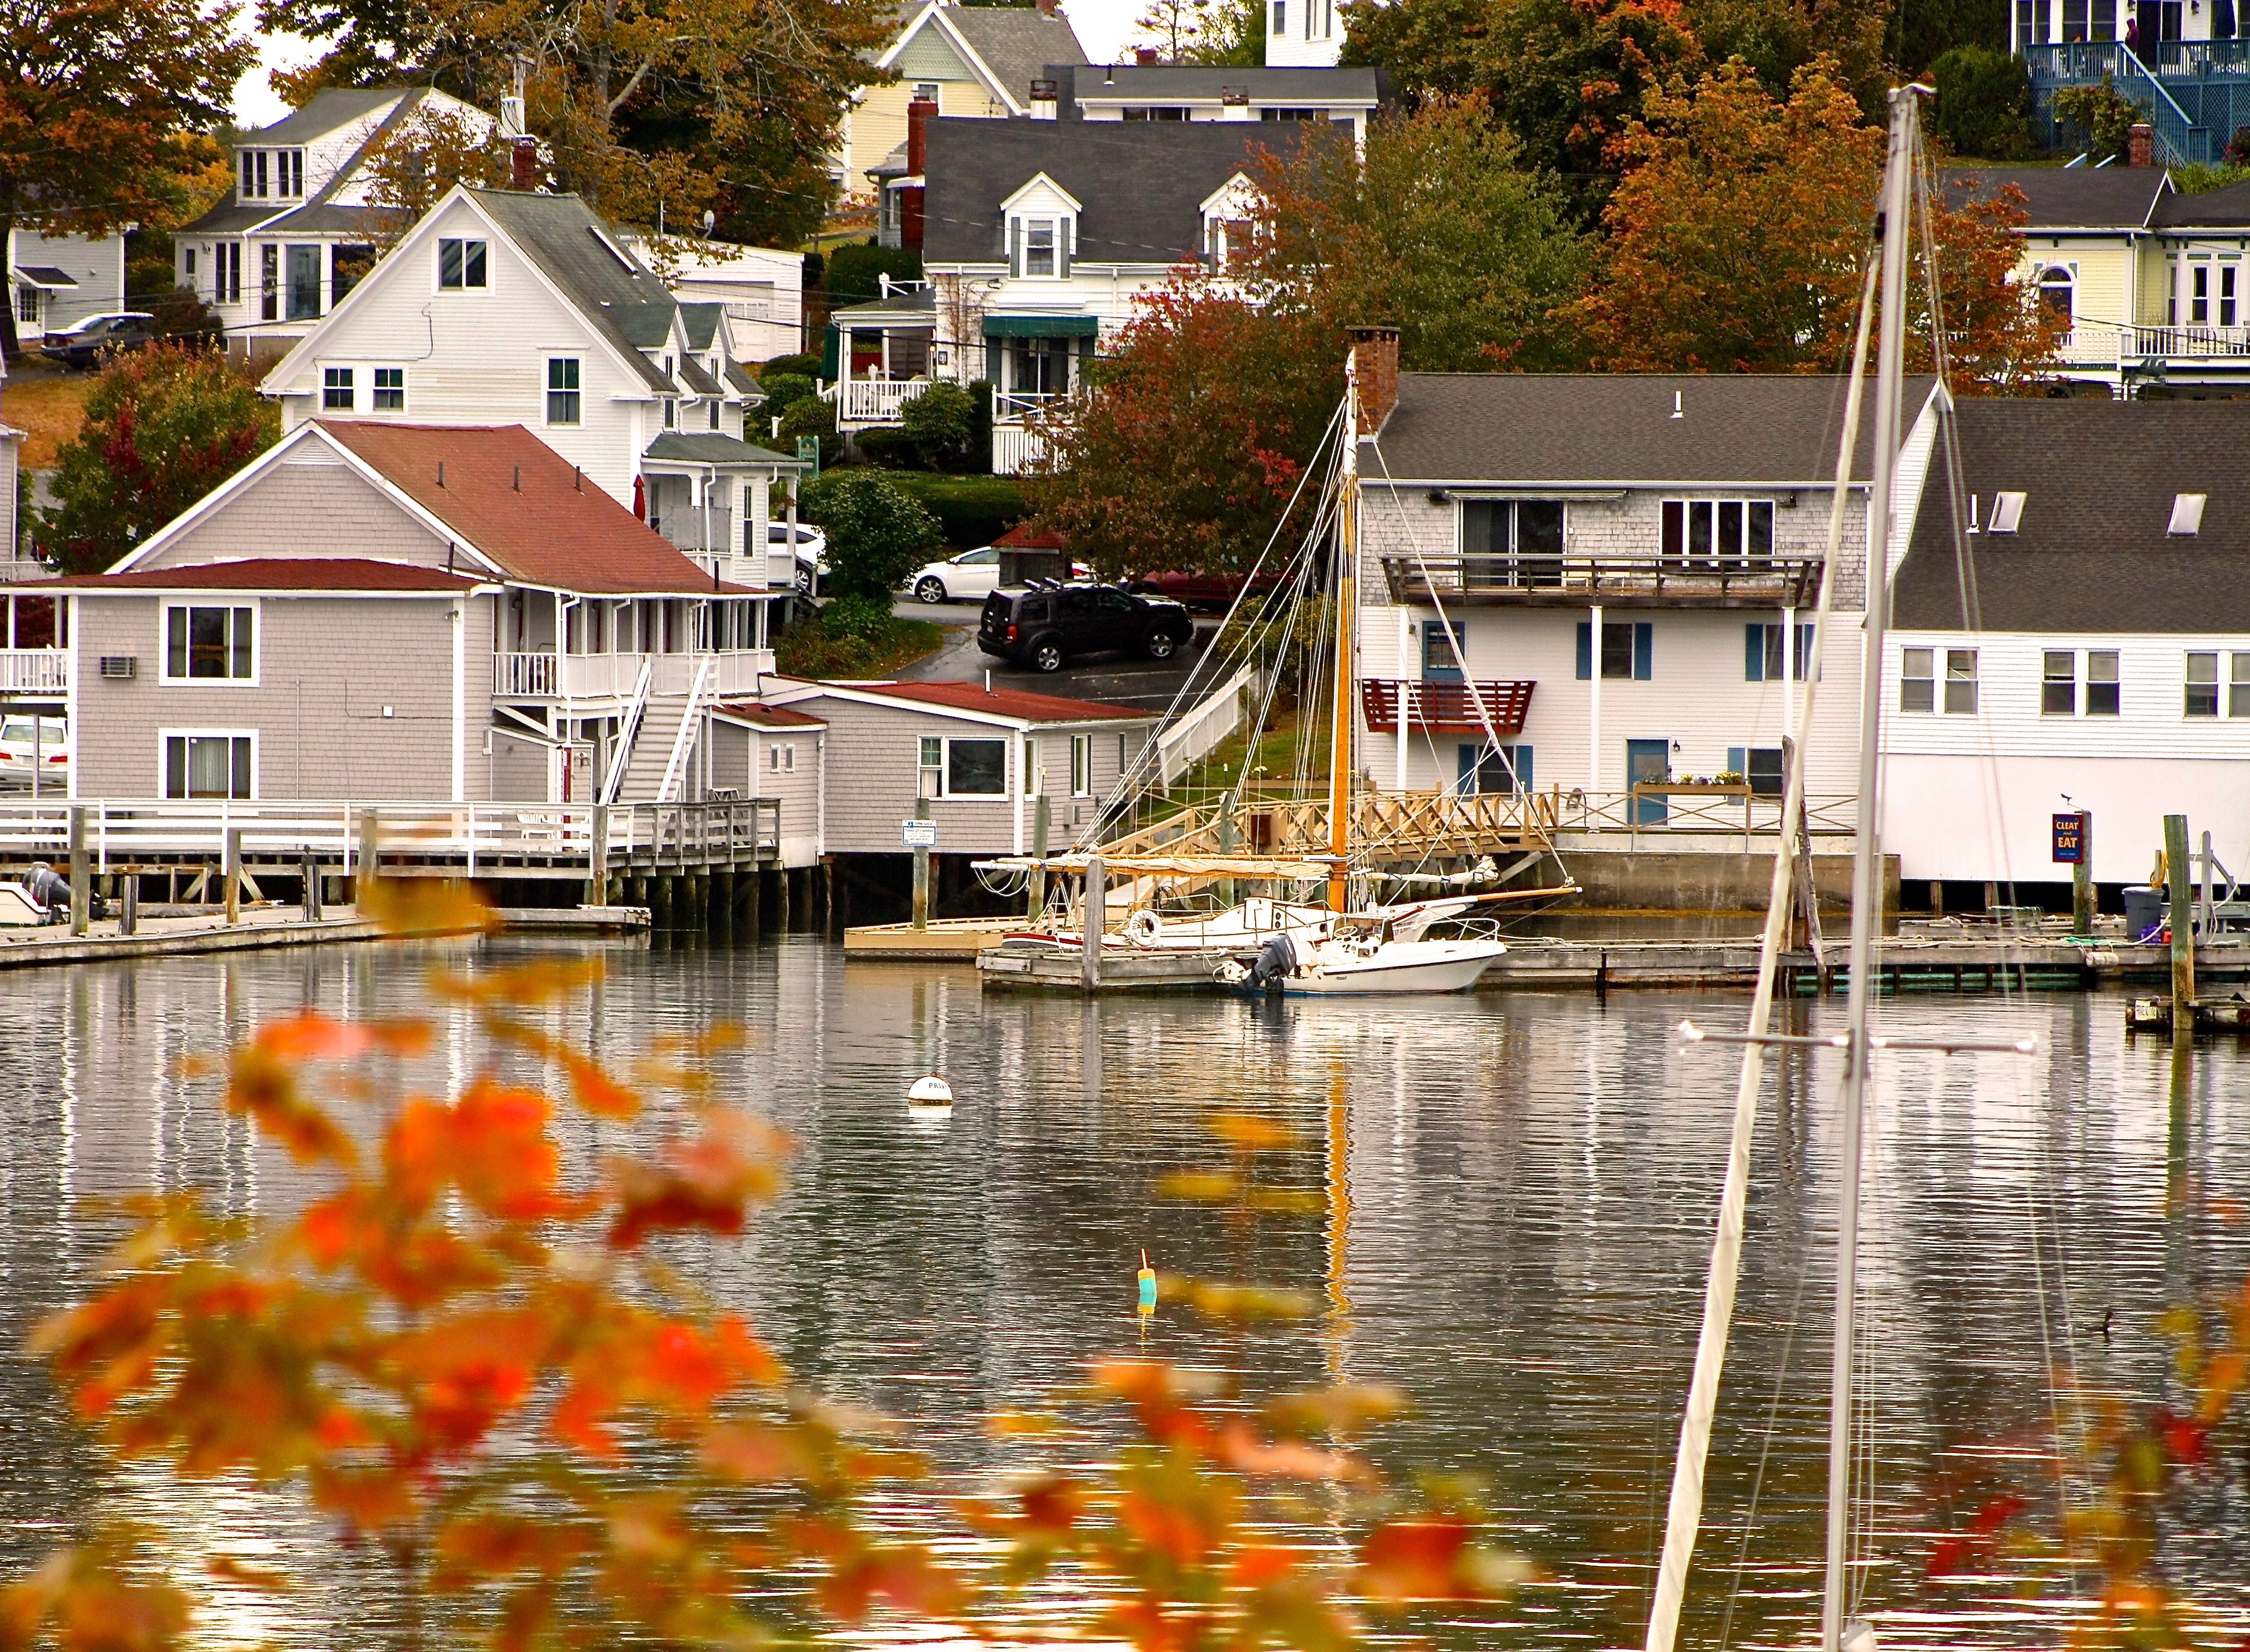 A scenic waterfront village/ White and beige homes are nestled on a hill with water in front. A white boat sits in the harbor.